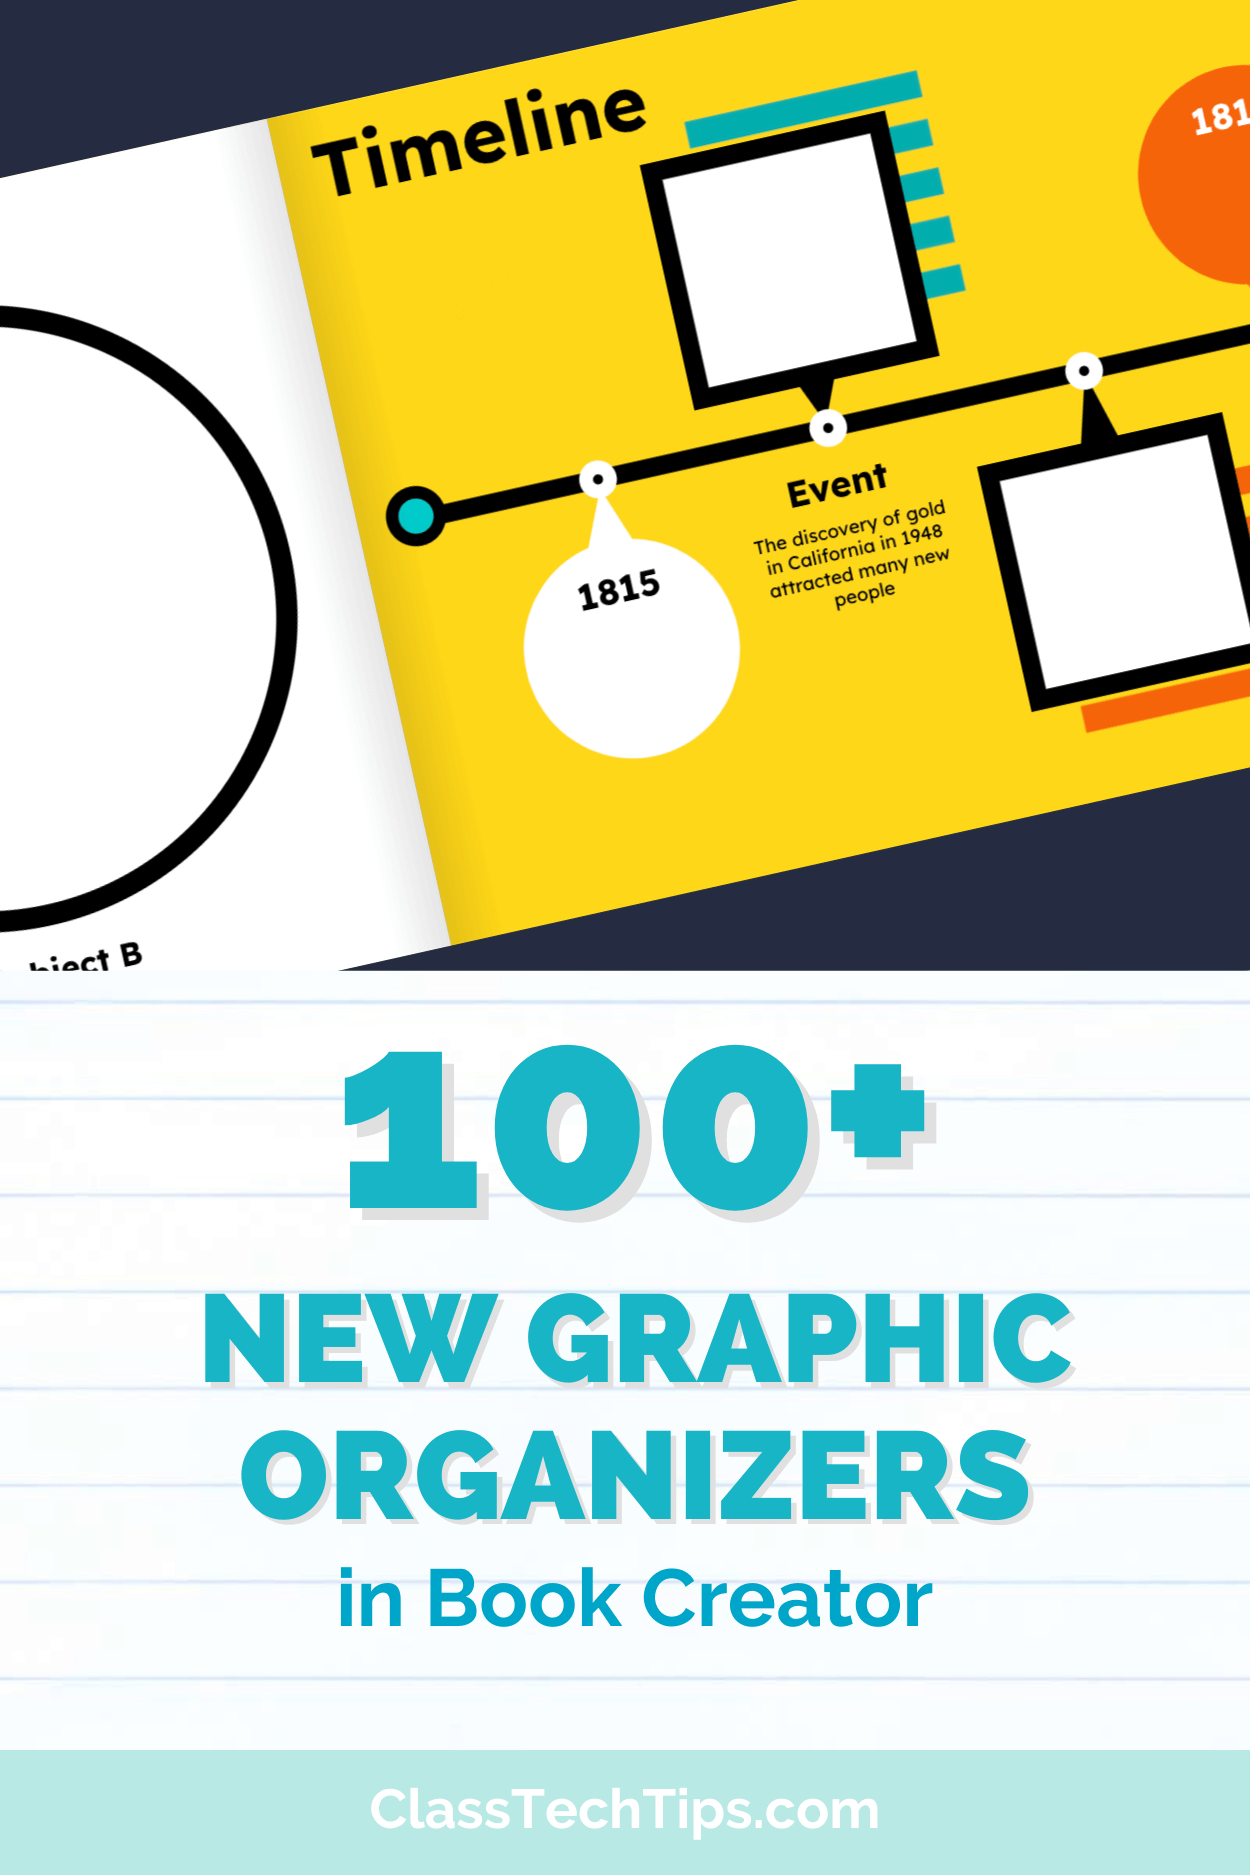 Featured image showcasing a screenshot of the timeline graphic organizer, one of the 100+ new additions in Book Creator.